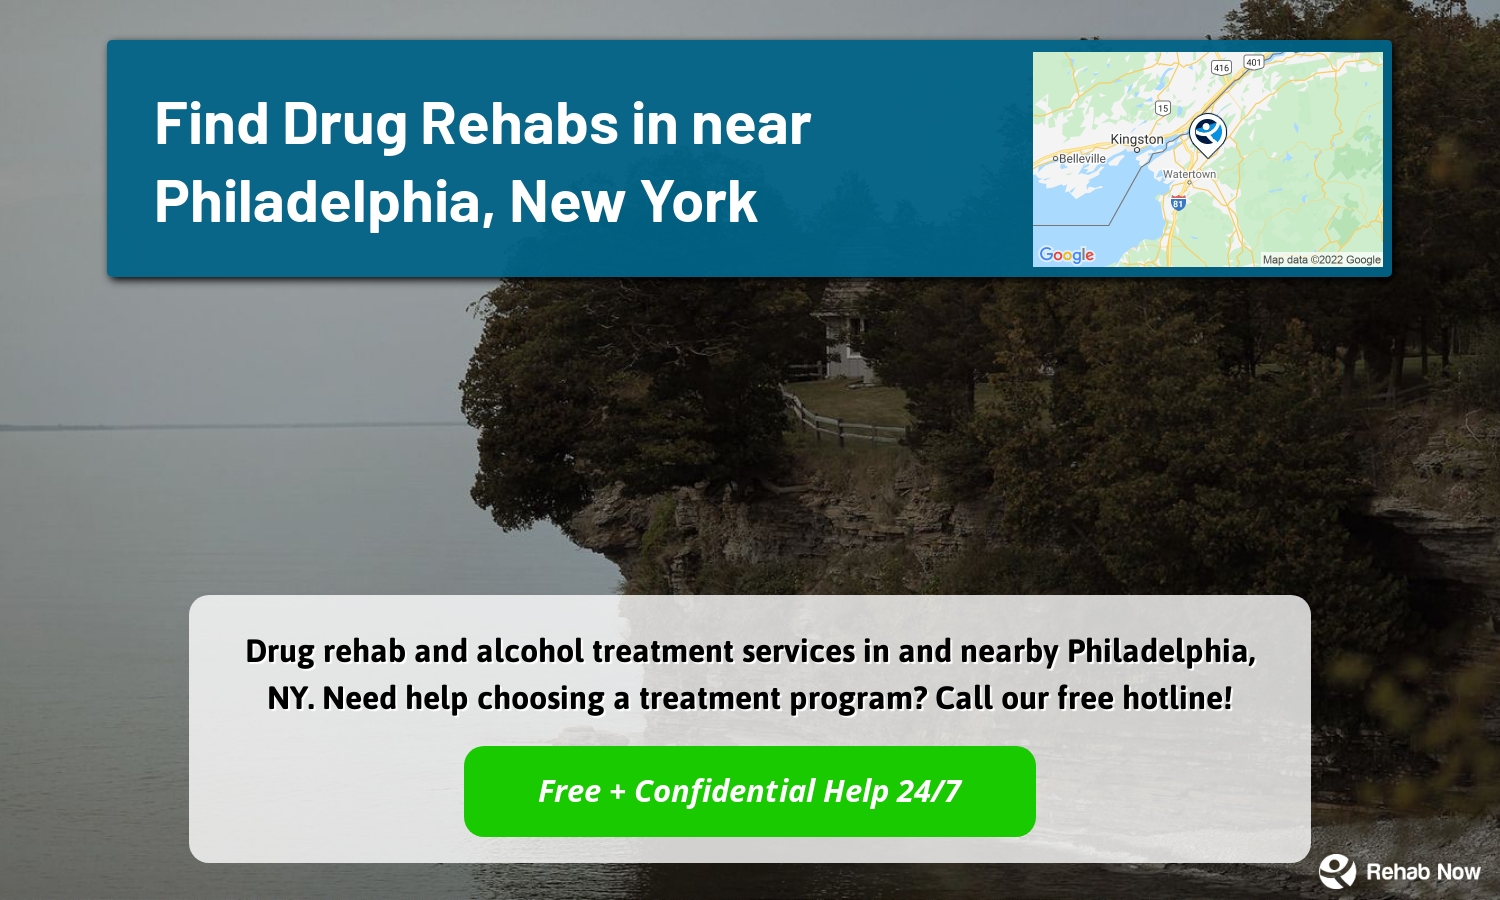 Drug rehab and alcohol treatment services in and nearby Philadelphia, NY. Need help choosing a treatment program? Call our free hotline!